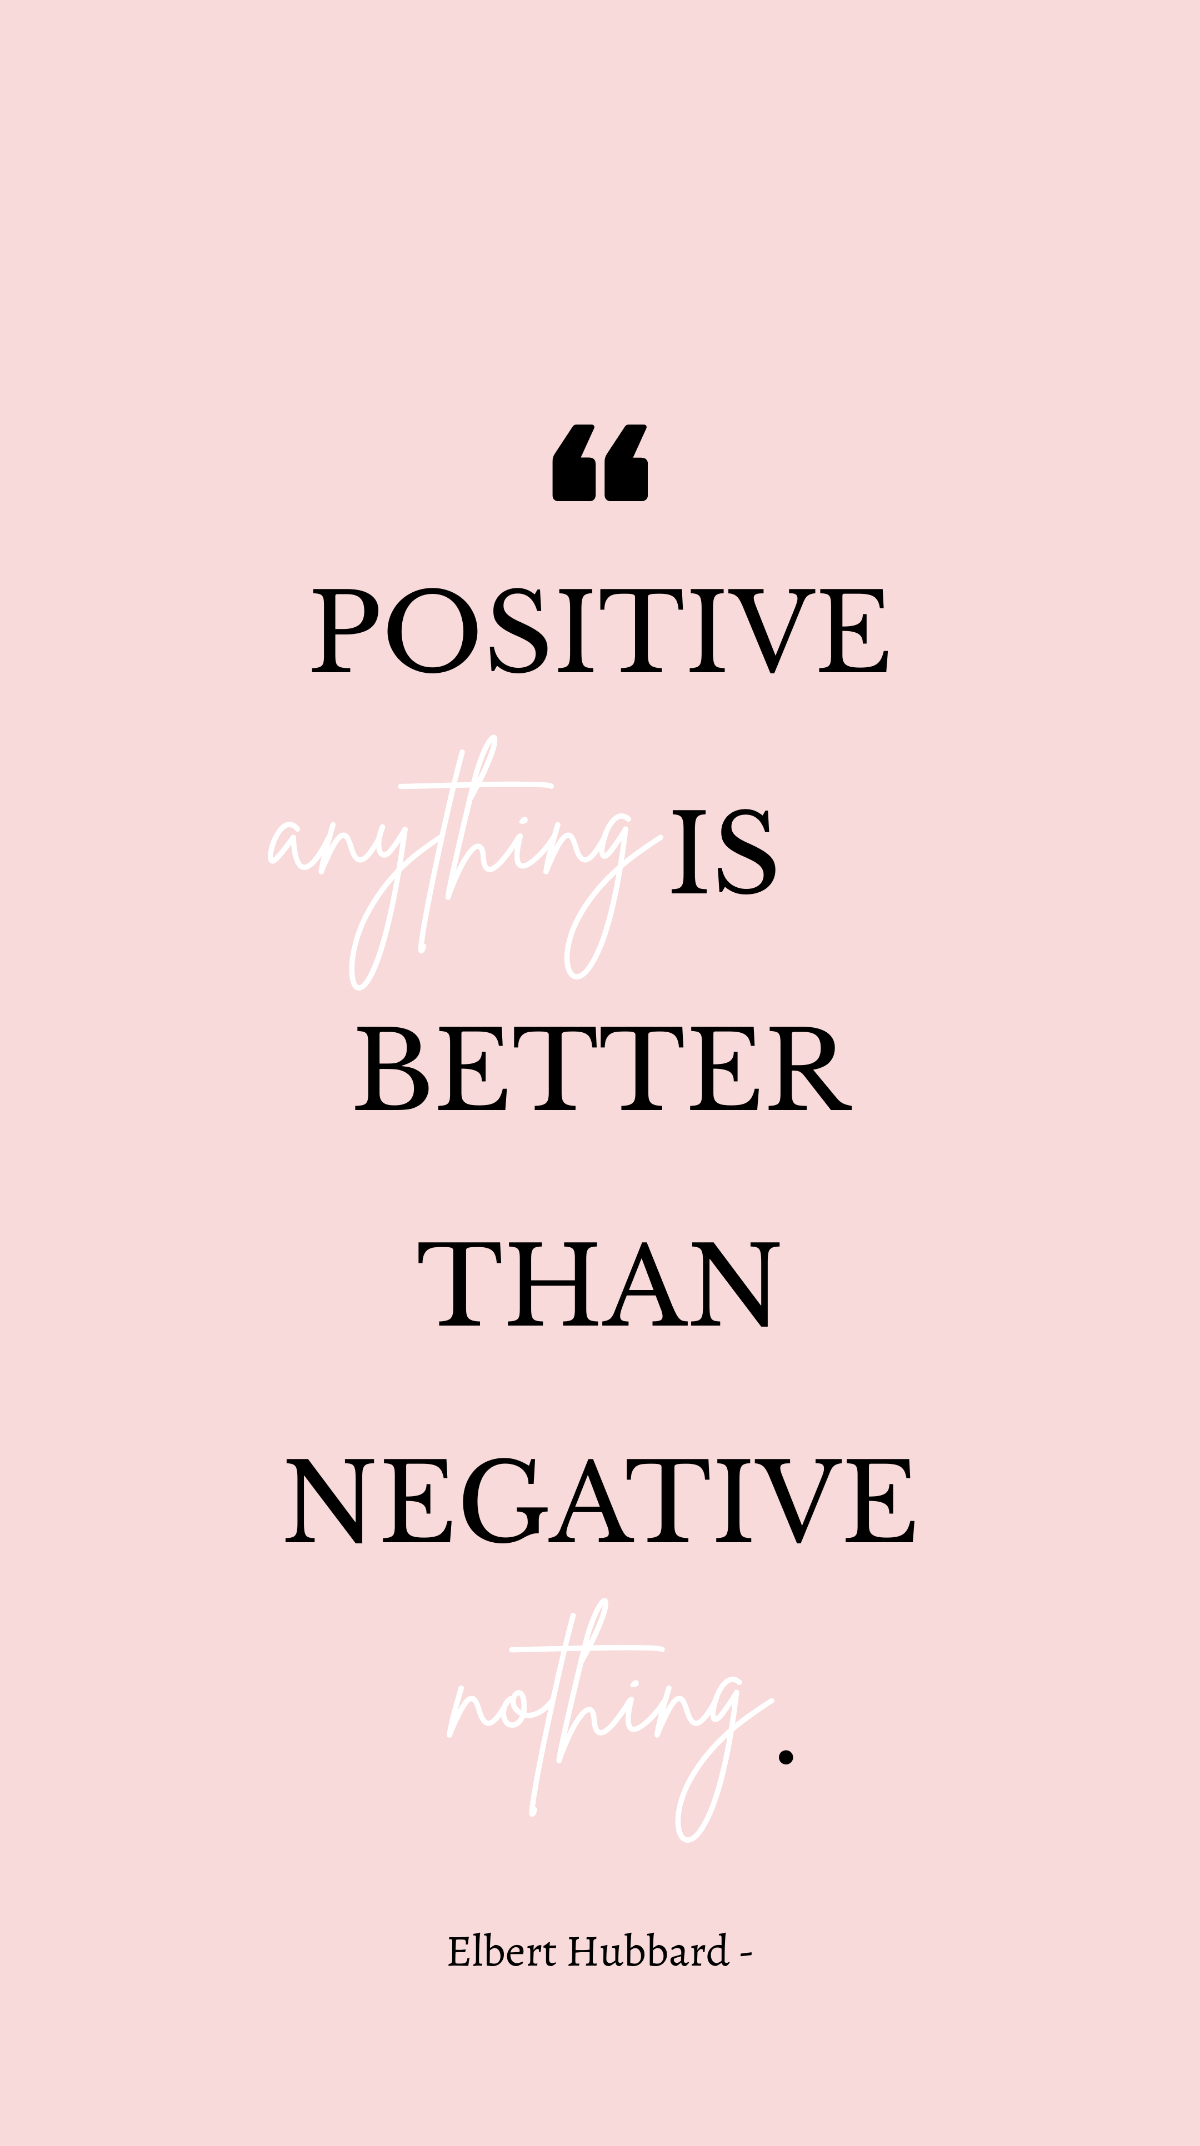 Elbert Hubbard - Positive anything is better than negative nothing. Template